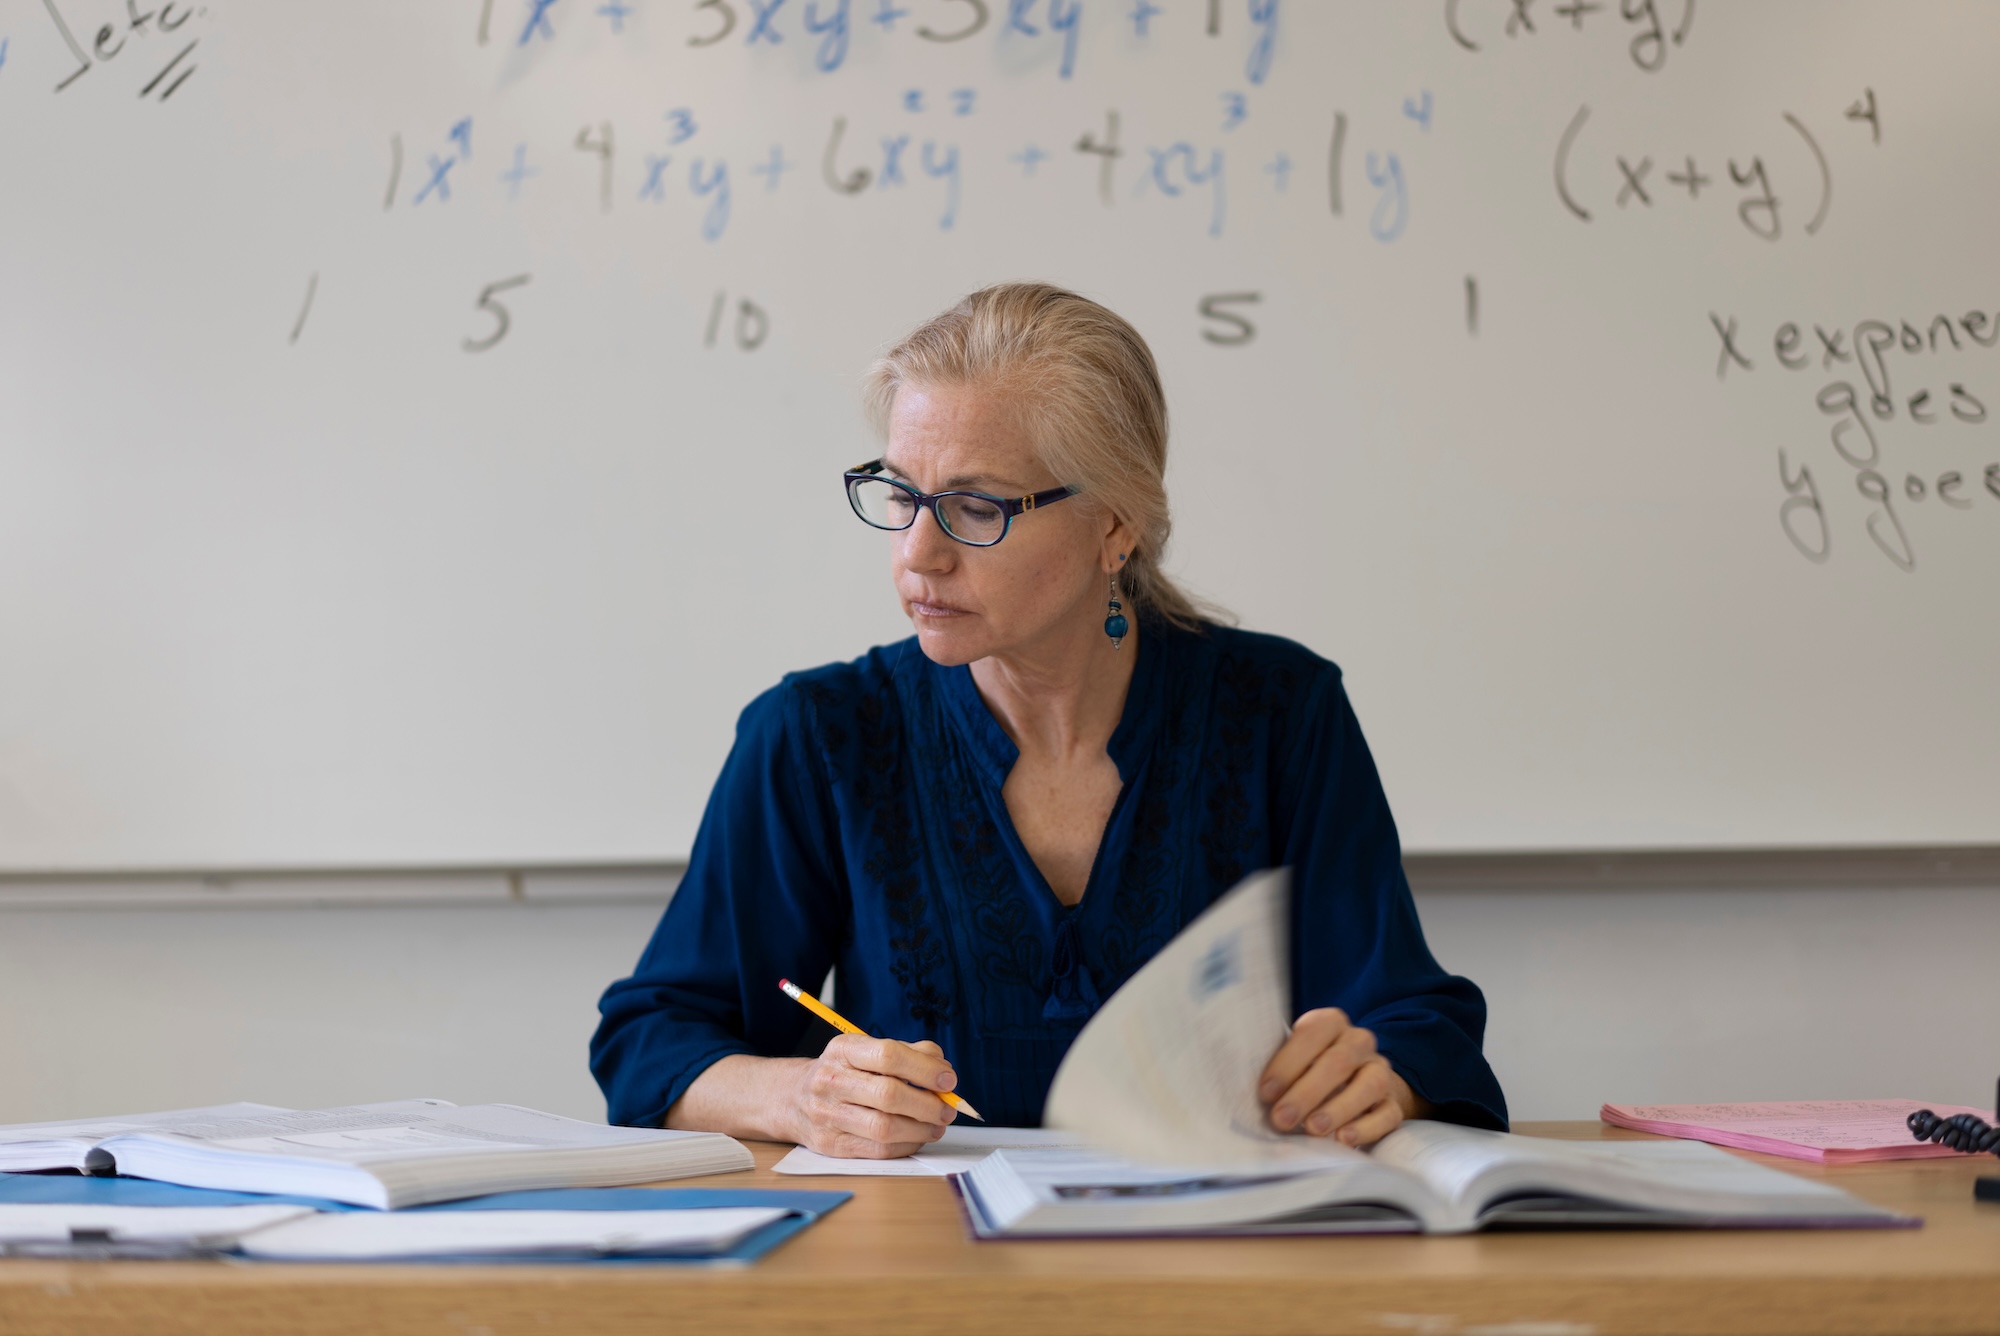 Photograph of a teacher sitting at a desk grading papers in front of a board with math formulas.